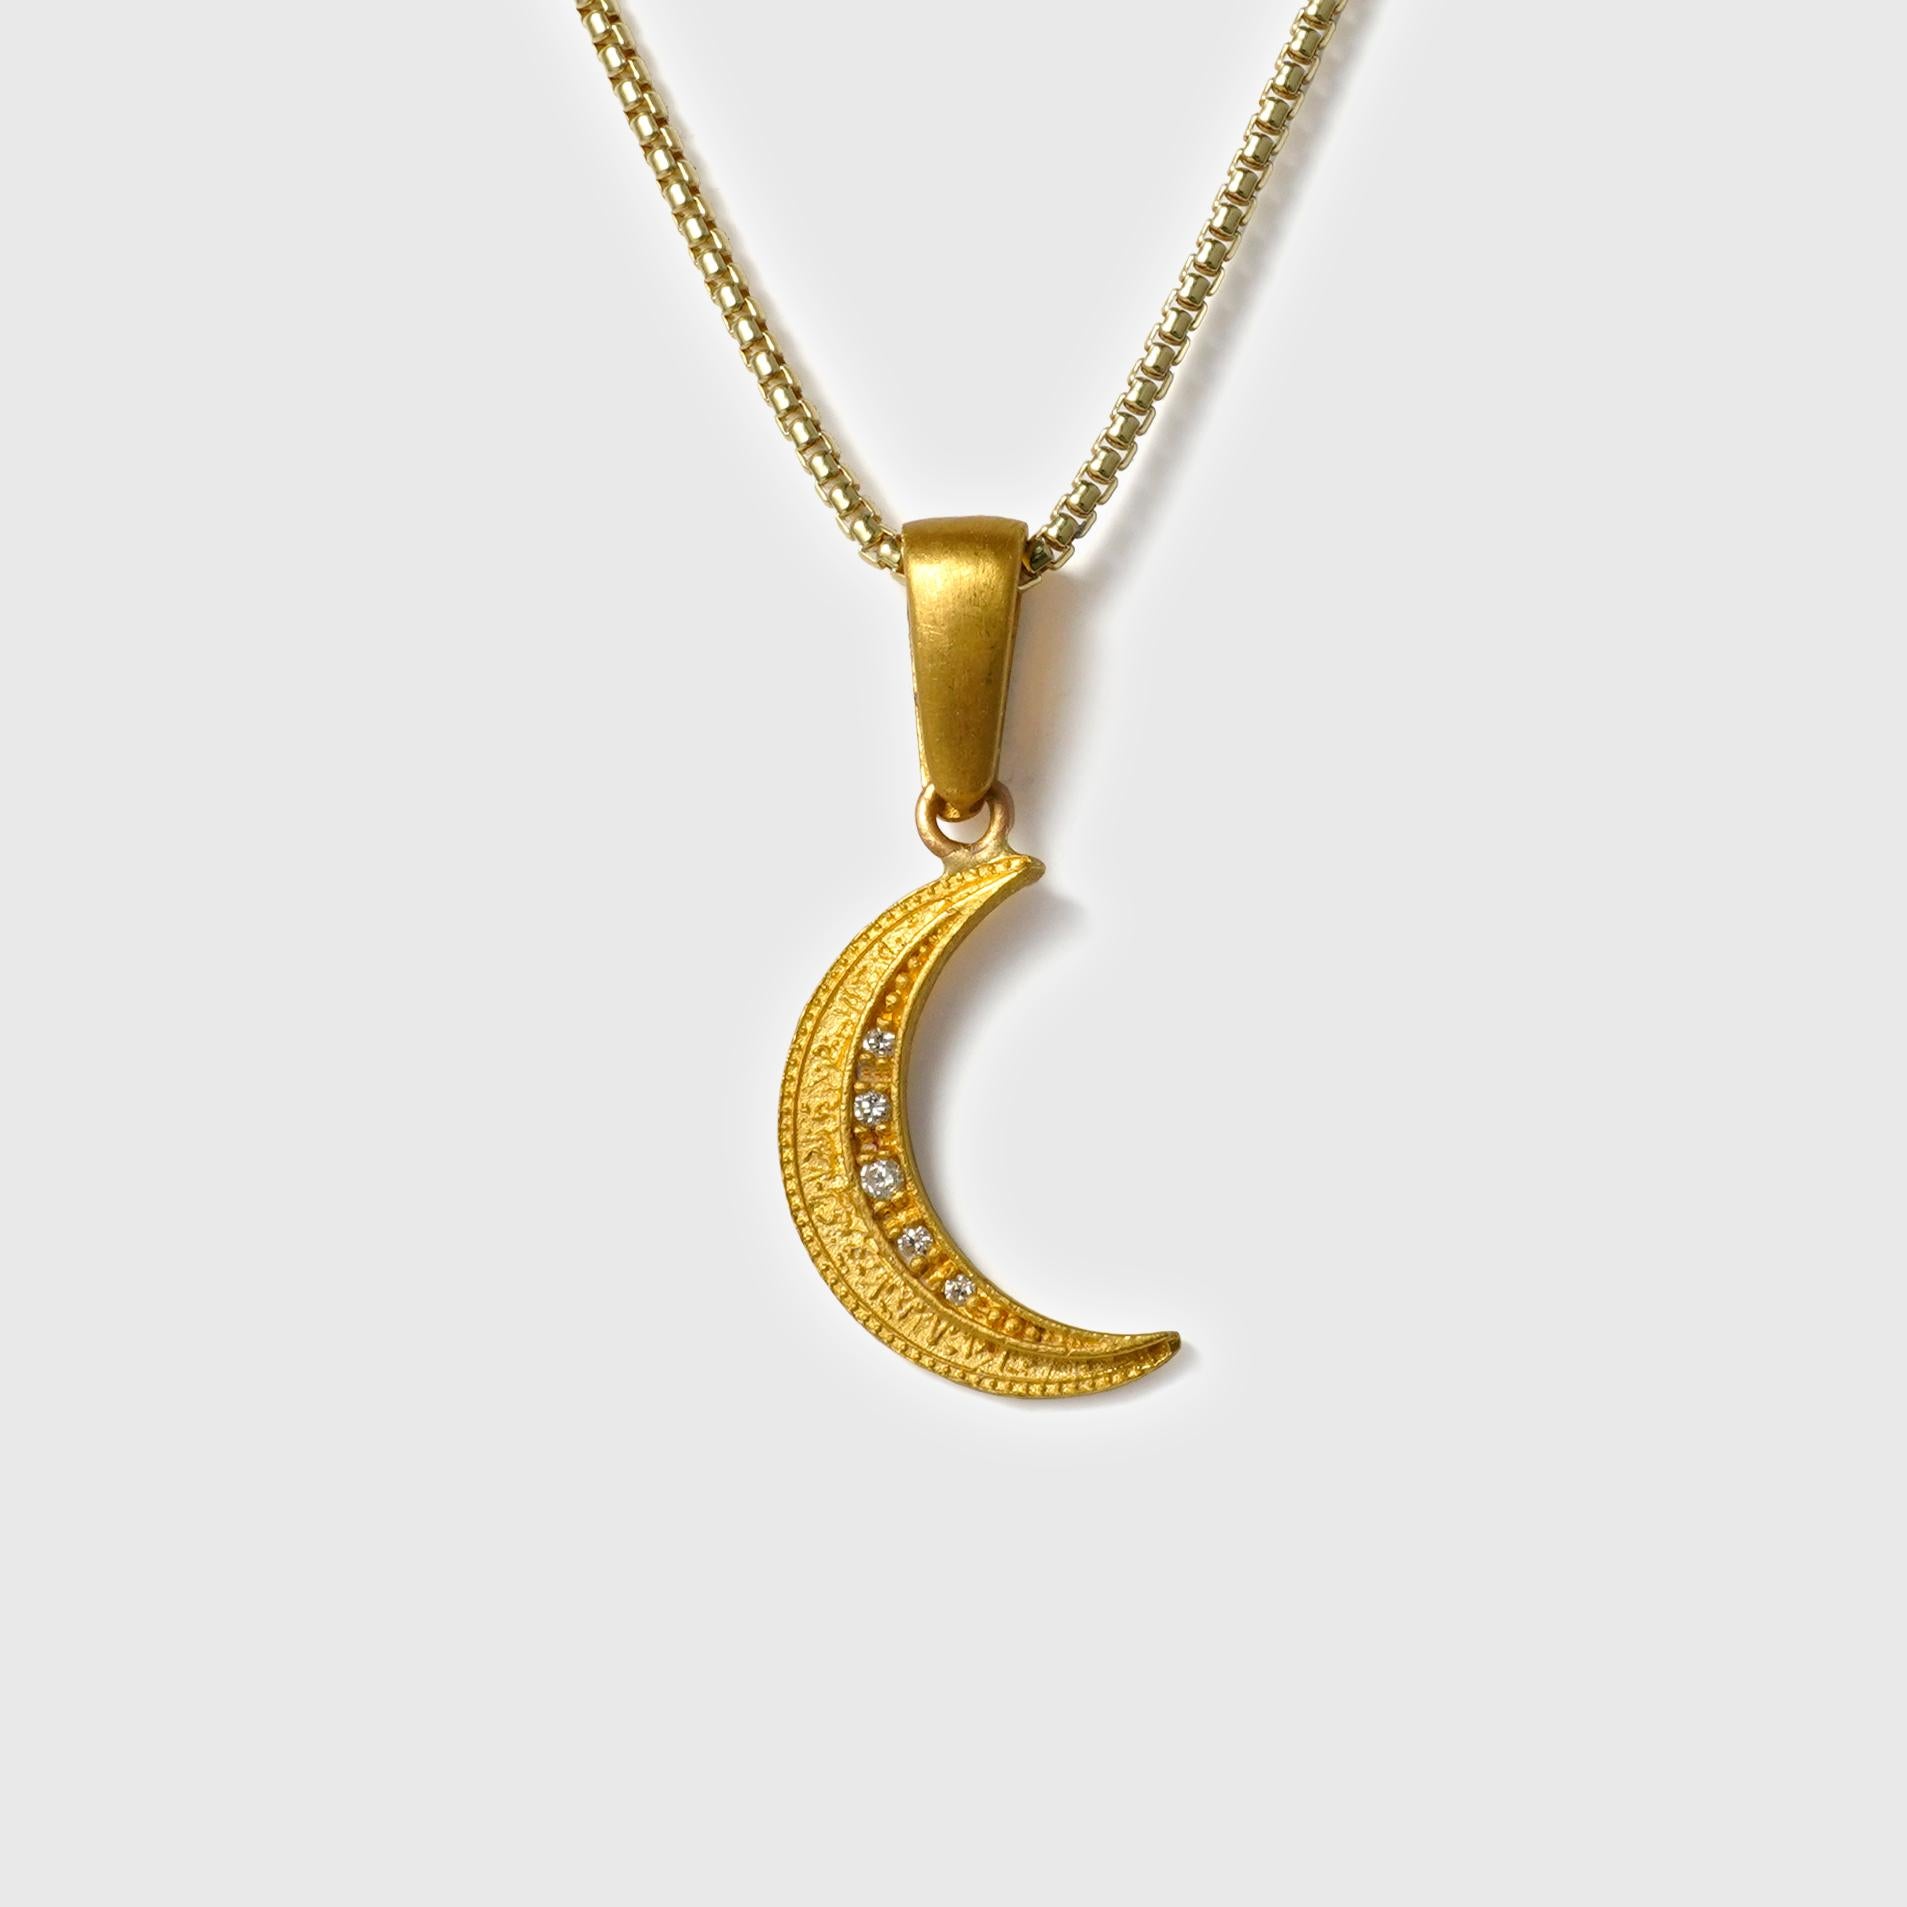 Art Nouveau Waxing or Waning Moon Charm Pendant, 24K Solid Yellow Gold with 0.04ct Diamonds For Sale